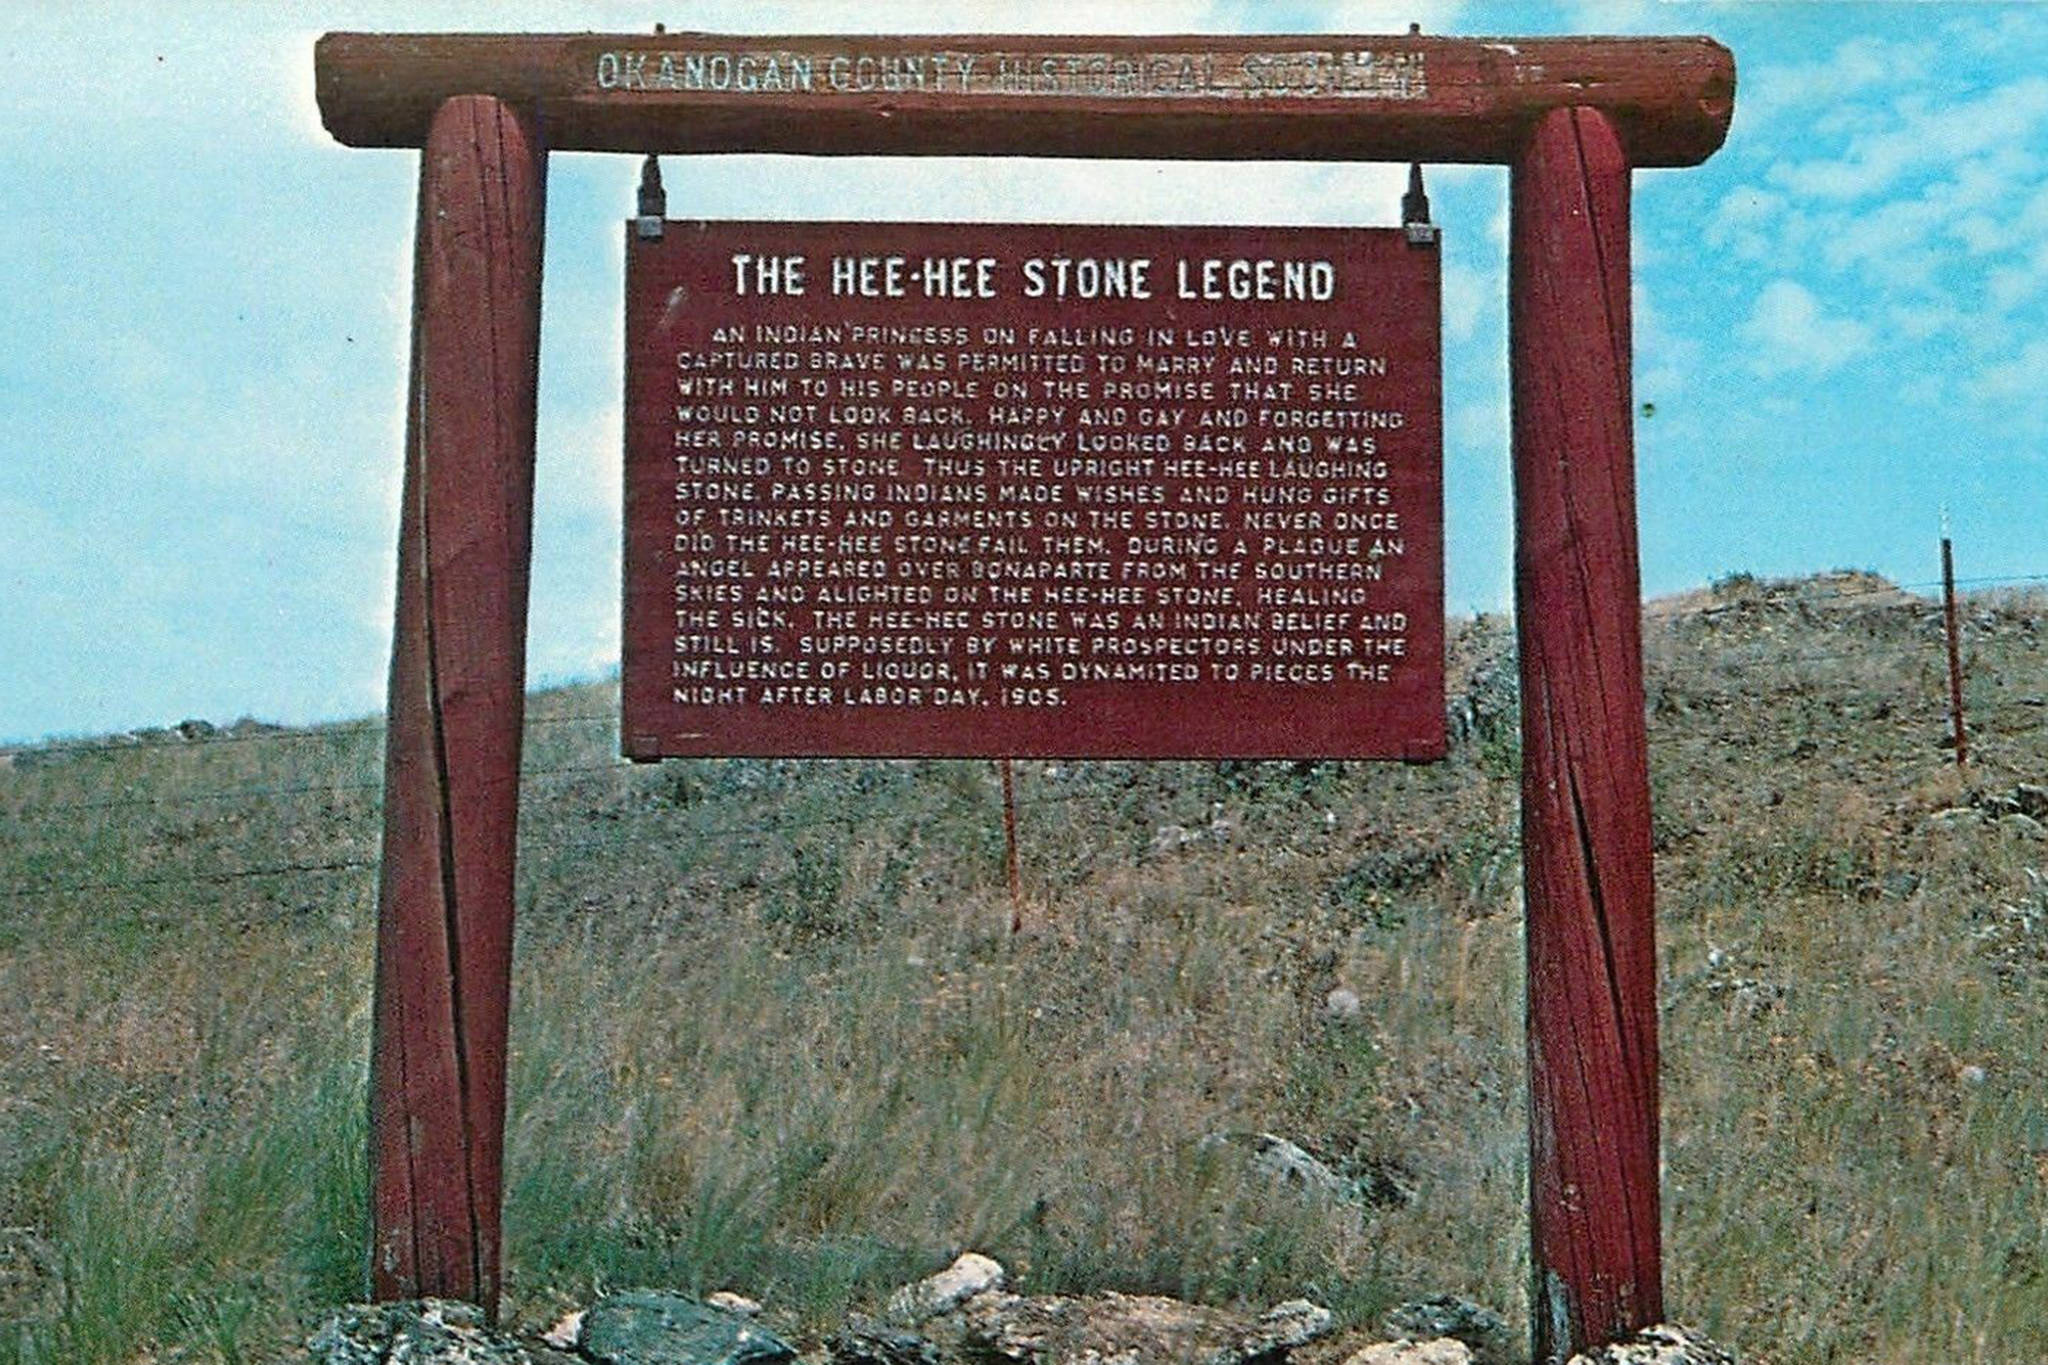 Okanogan County Historical Marker on way to Chesaw at location of the Te Hee Stone.